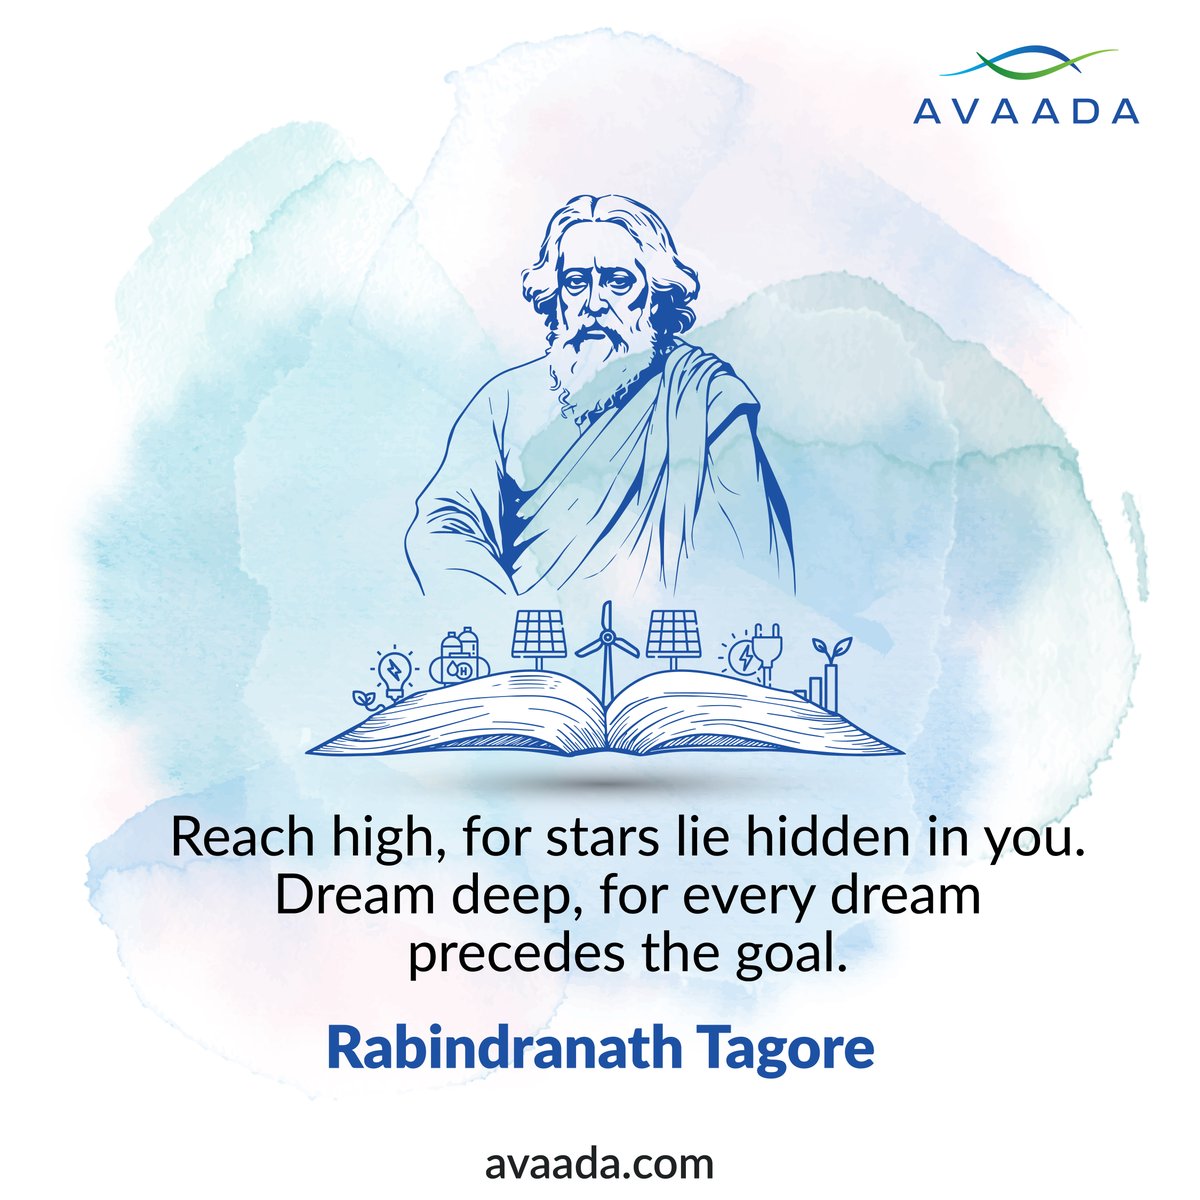 Avaada celebrates Rabindranath Jayanti with a vision for a world illuminated by clean energy. United for this cause we can make this dream a reality! 

#RabindranathJayanti #RabindranathTagore #AvaadaGroup #EnergyTransition #SustainableEnergy #ClimatePositive